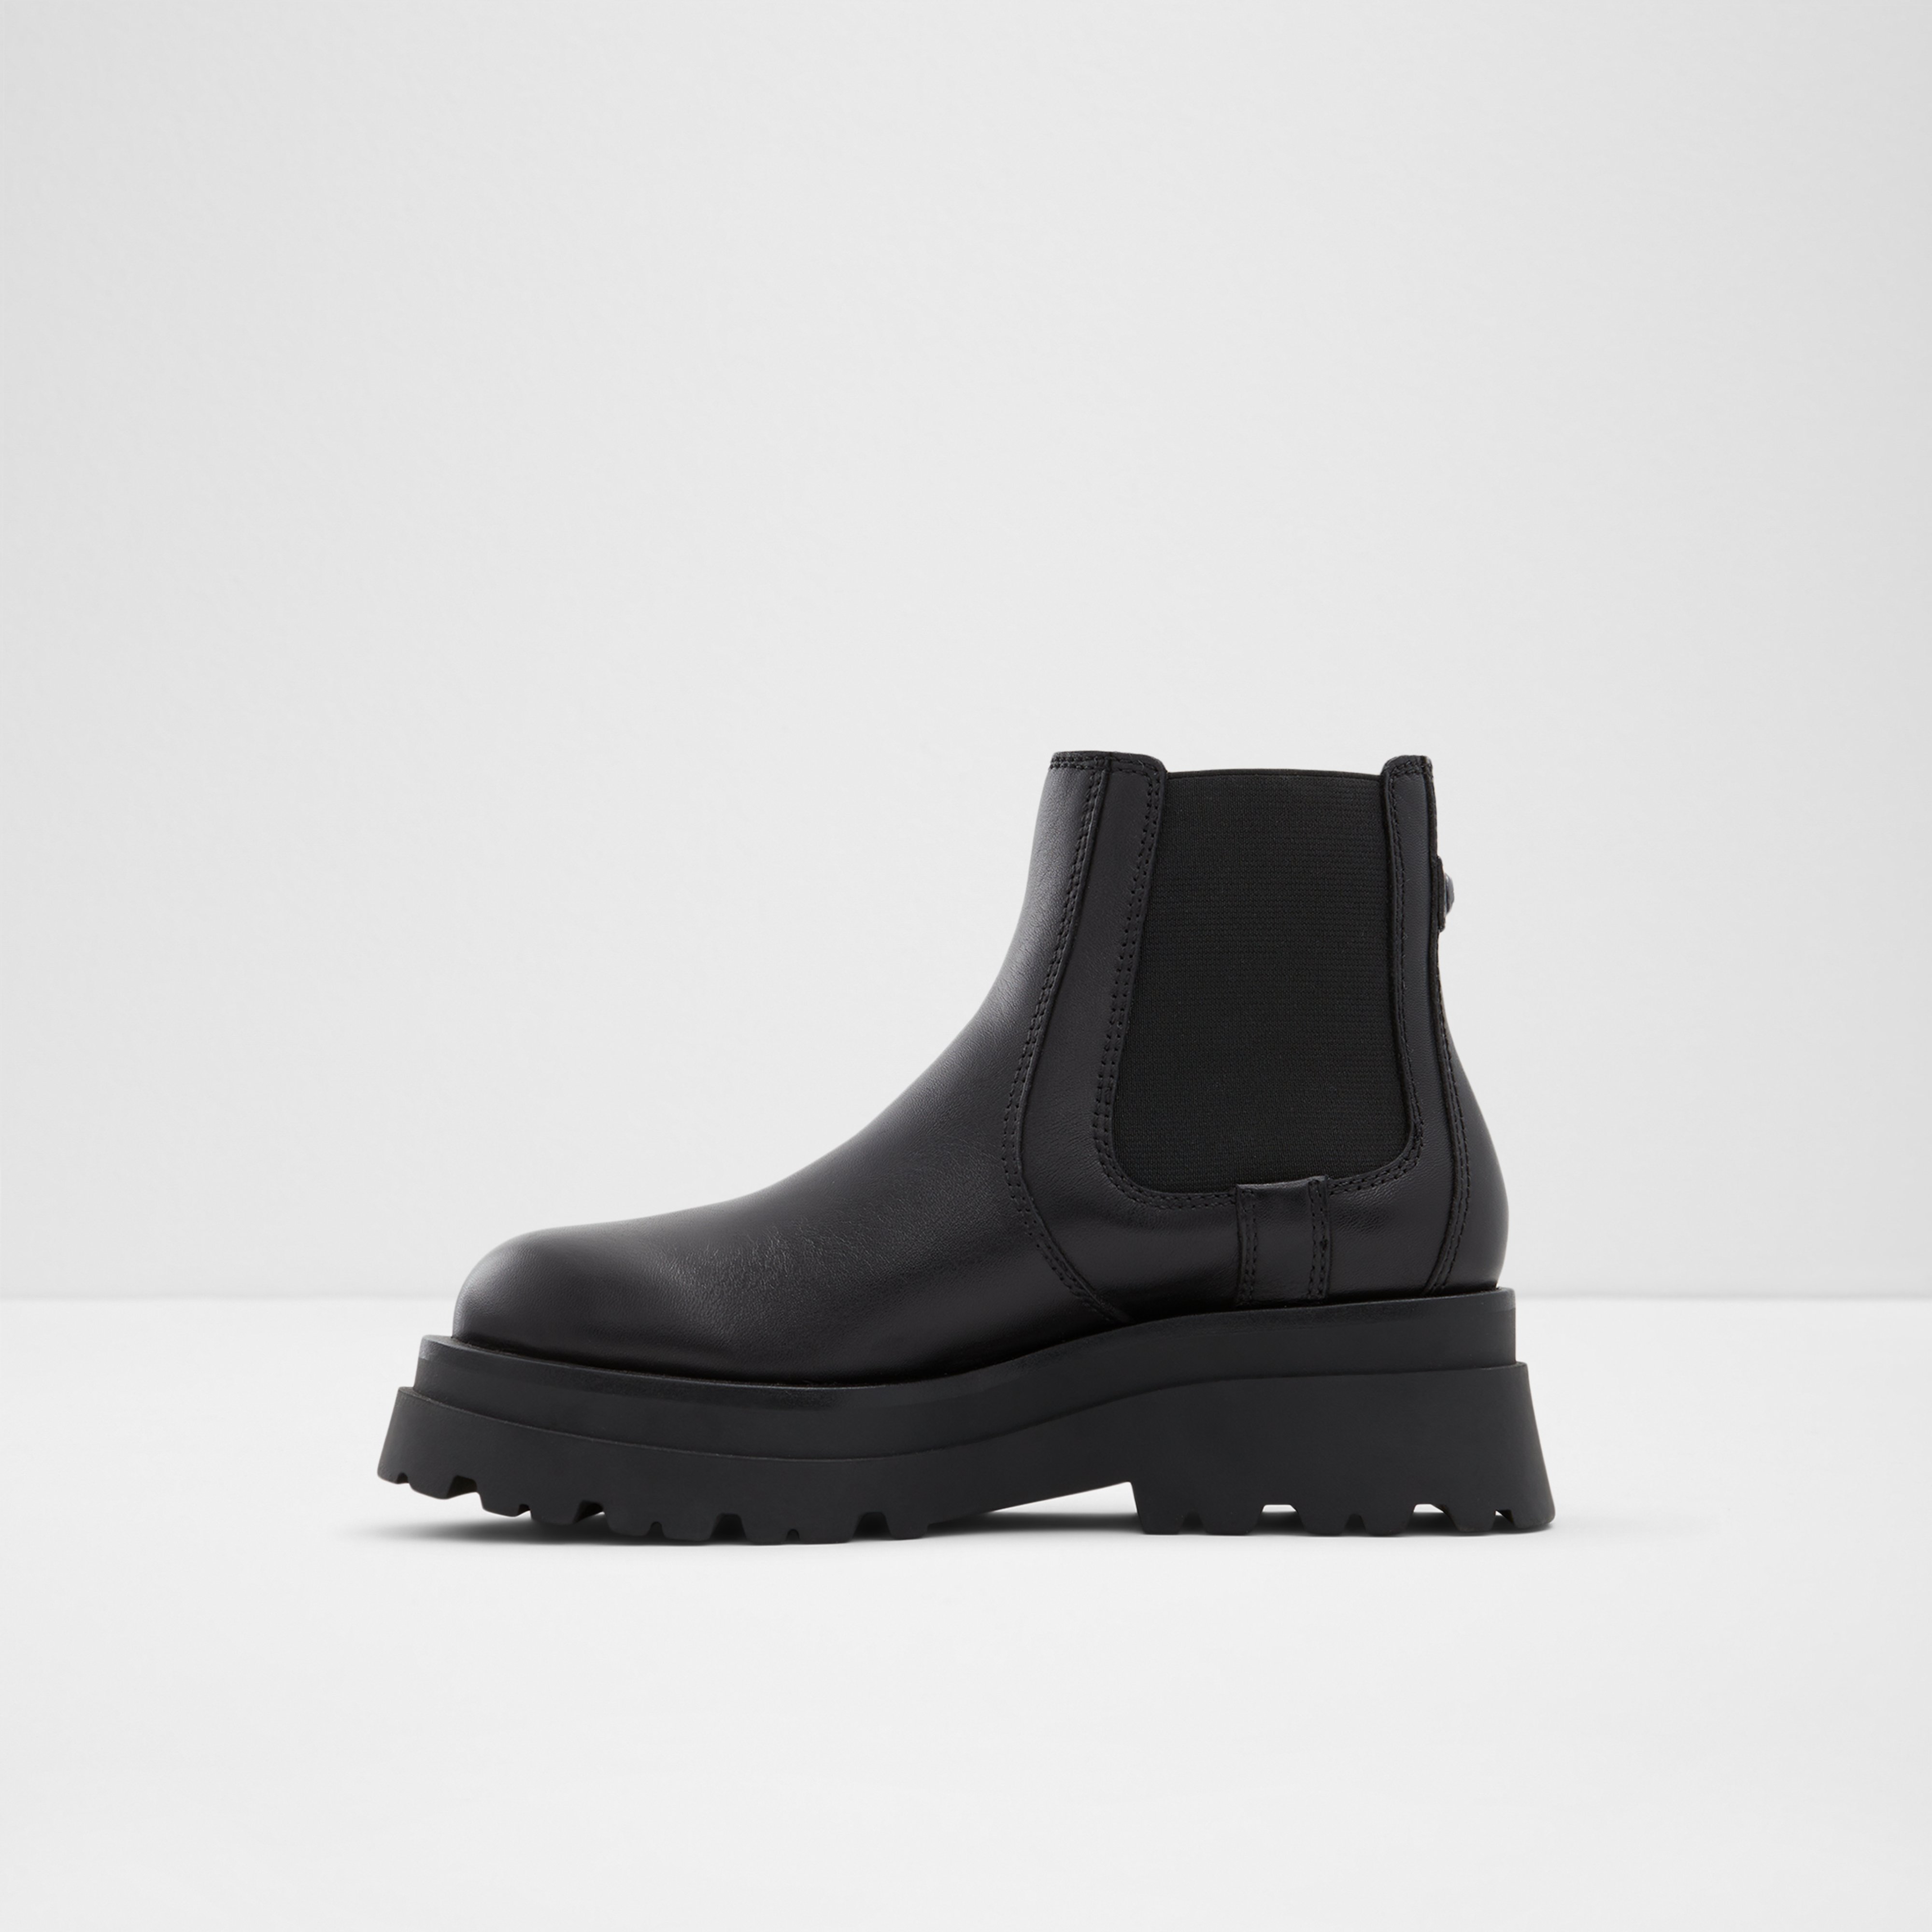 Stompd Black Leather Smooth Women's Casual Boots | ALDO US